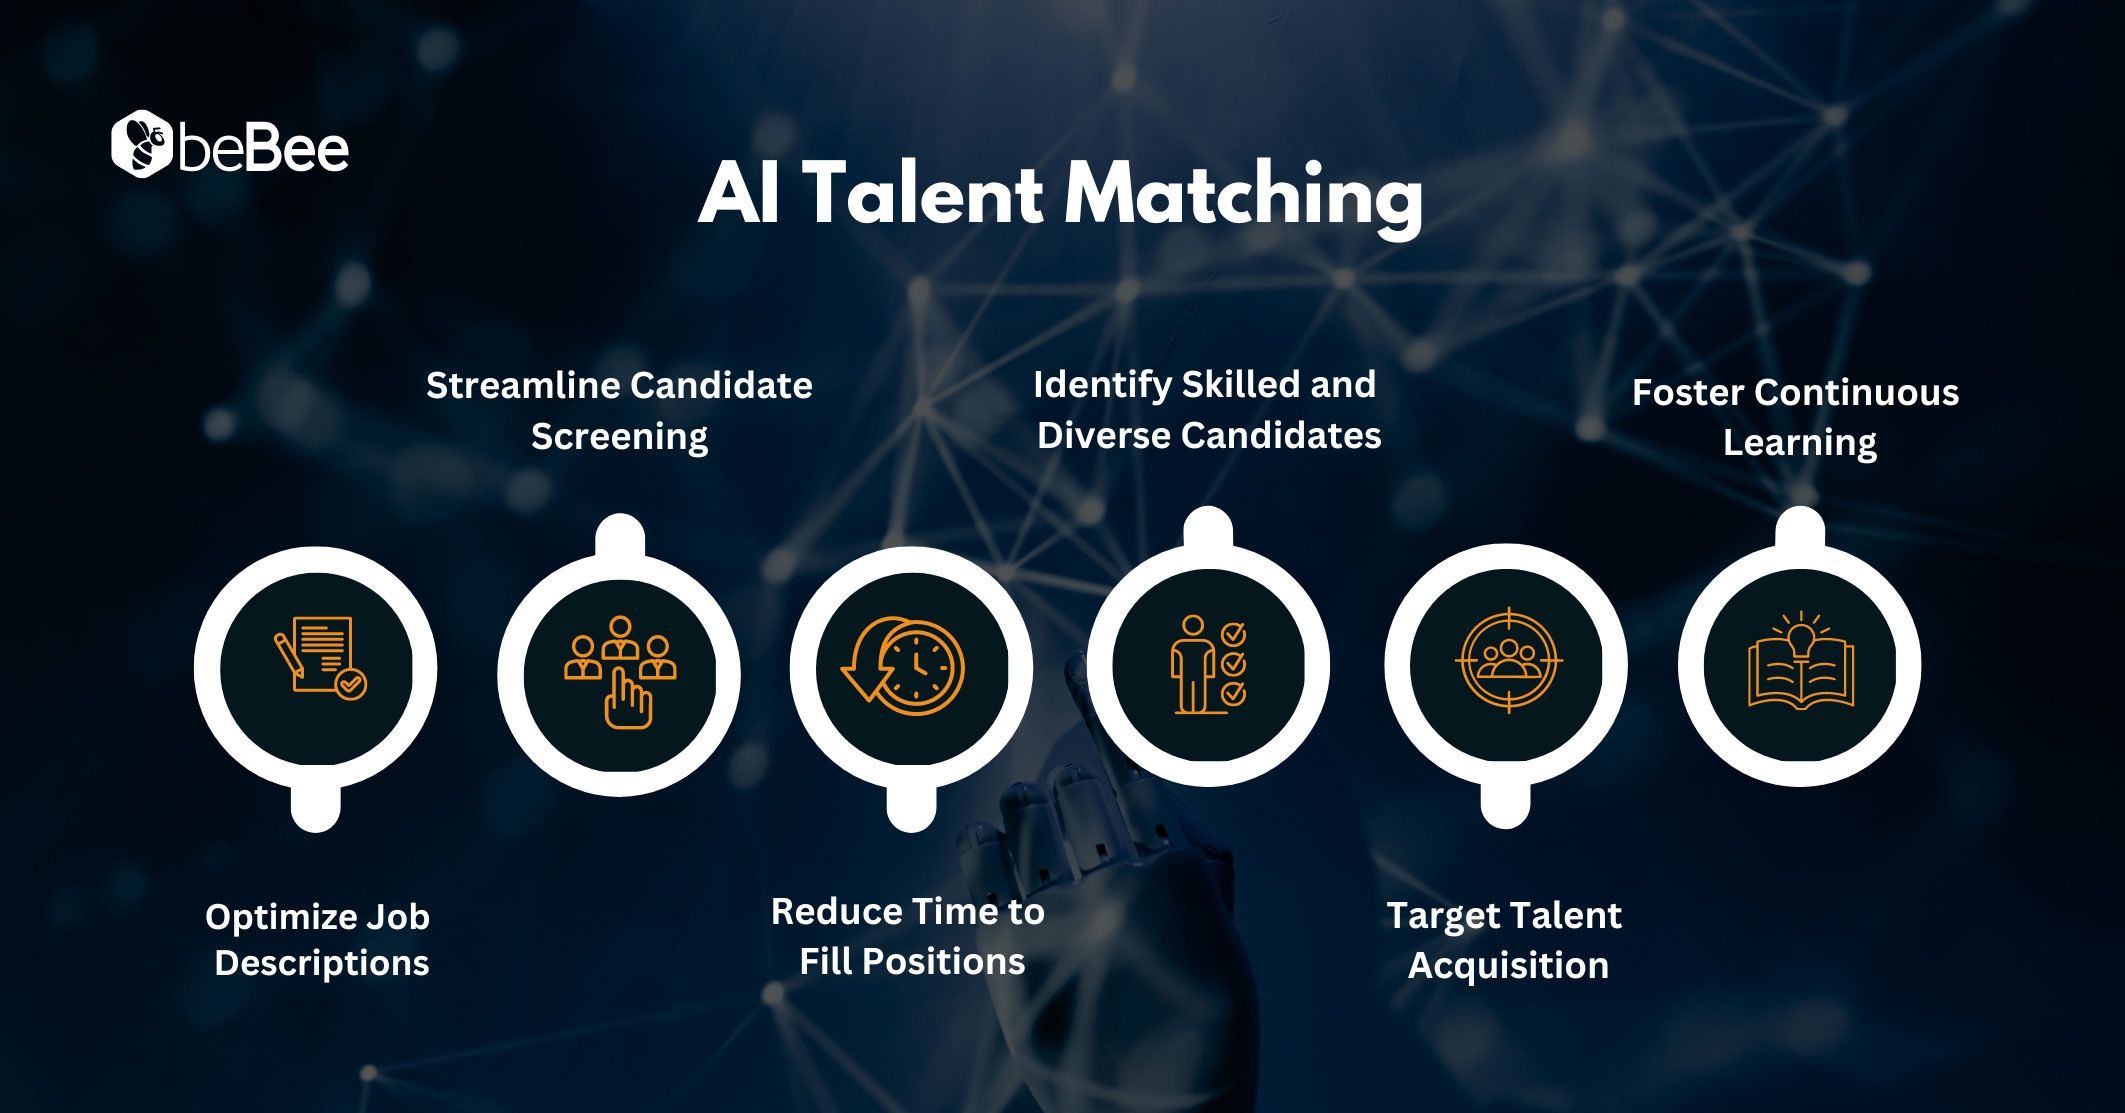 Ogee Al Talent Matching

Streamline Candidate Identify Skilled and Foster Continuous
Screening Diverse Candidates WENO IL)
ifs
Te

   

Optimize Job Reduce Time to Target Talent
Descriptions Fill Positions Acquisition